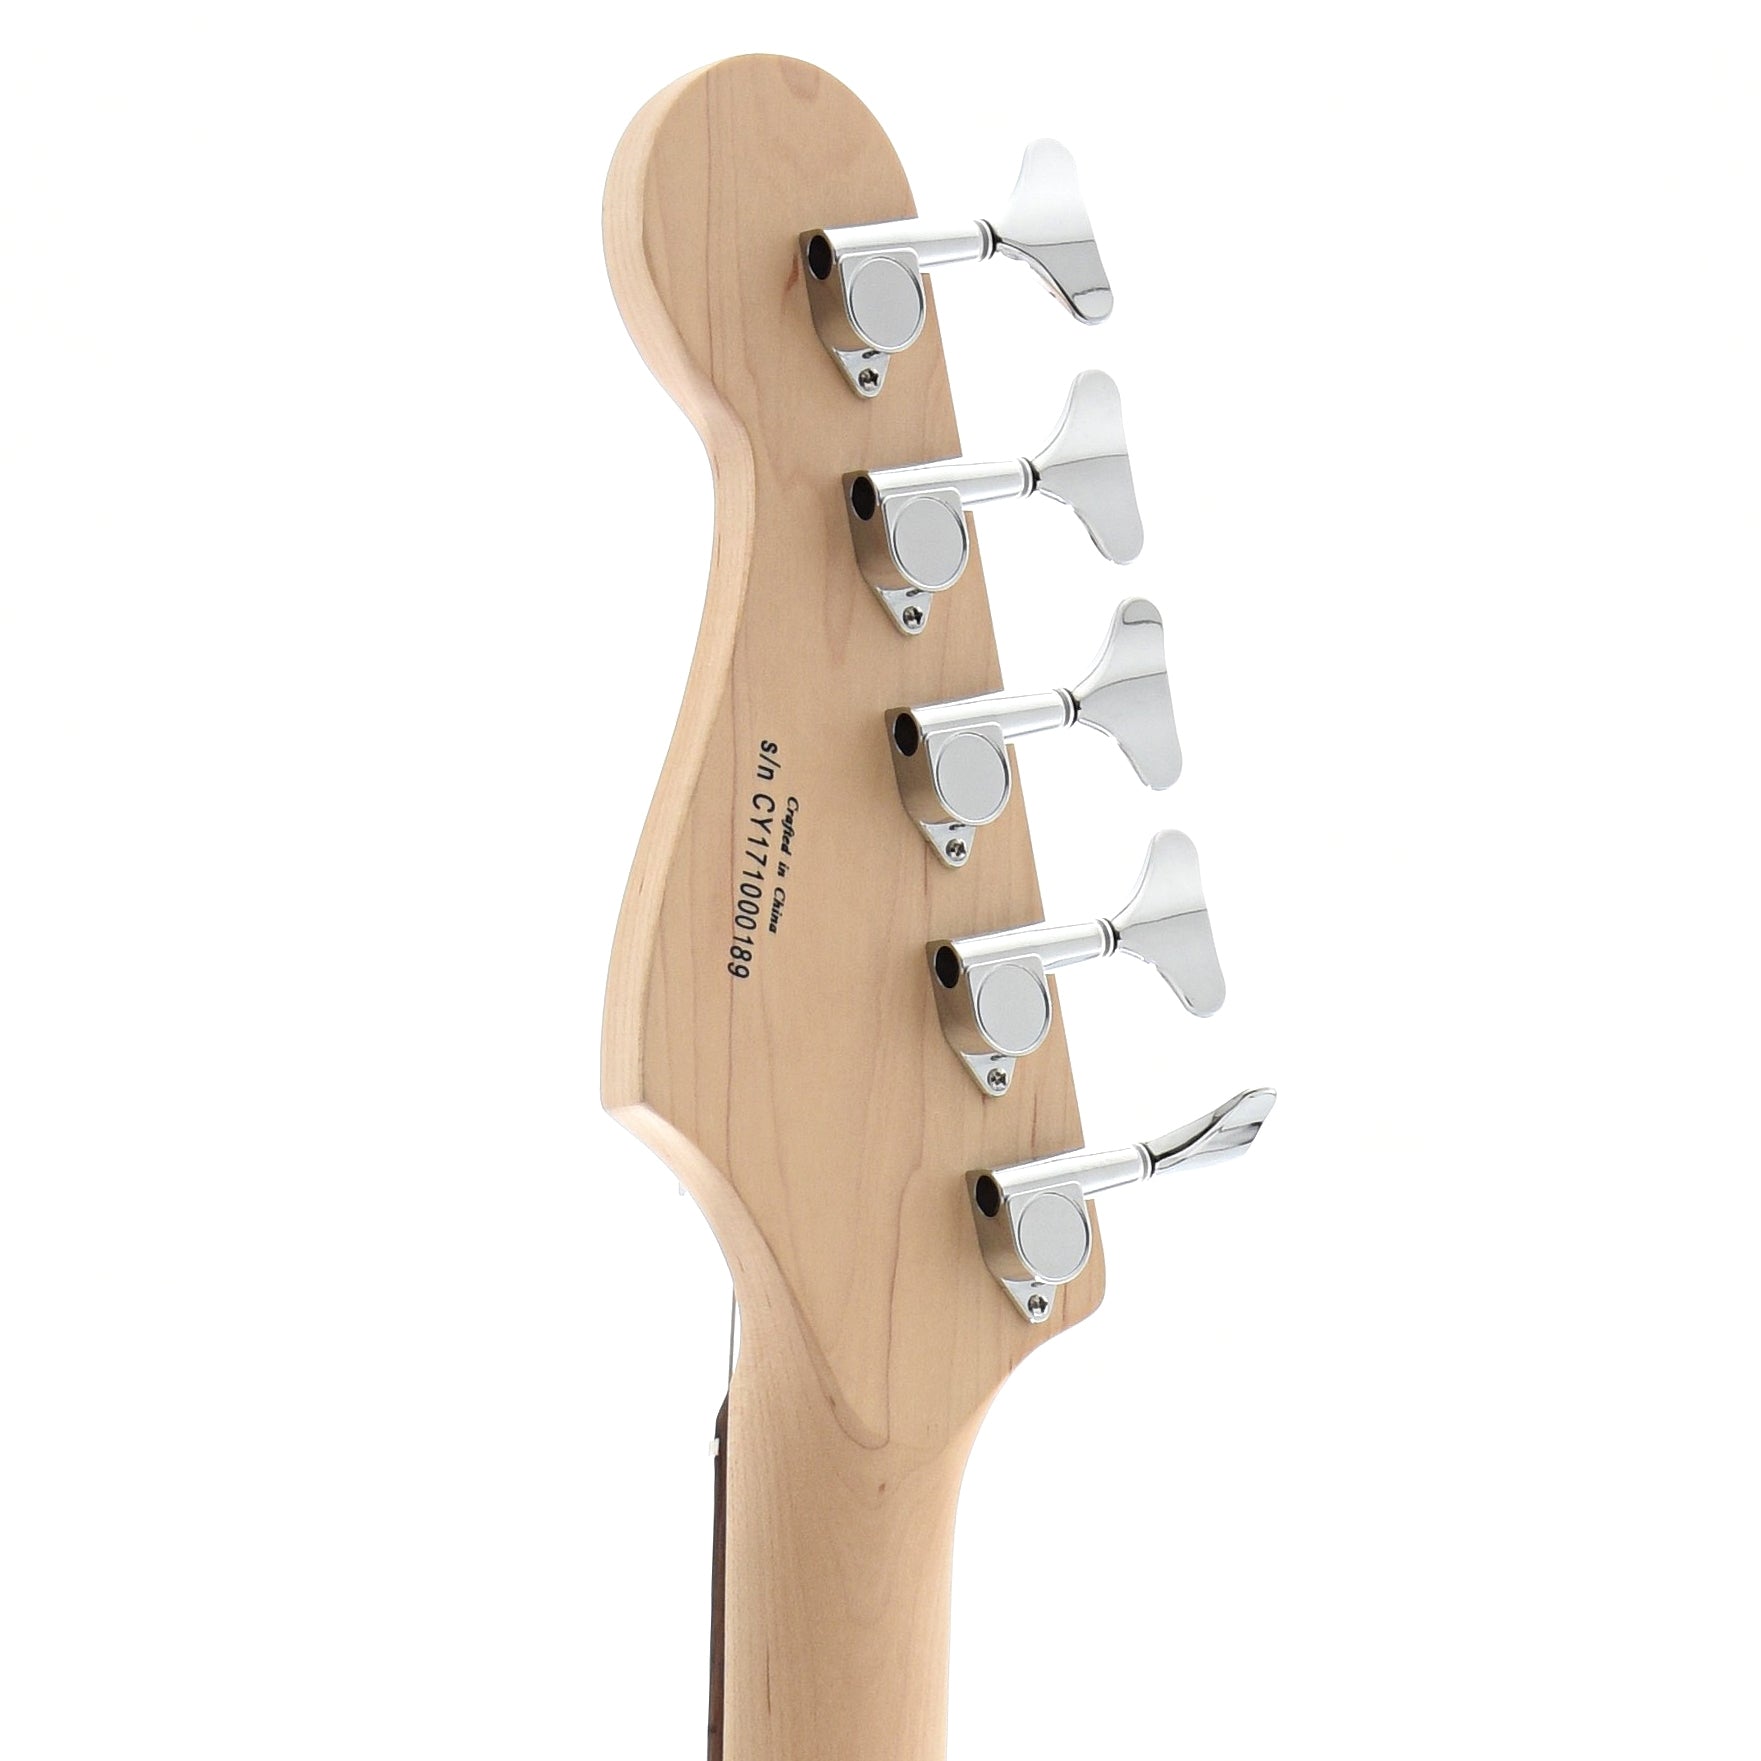 Back headstock of Squier Affinity Jazz Bass 5-String